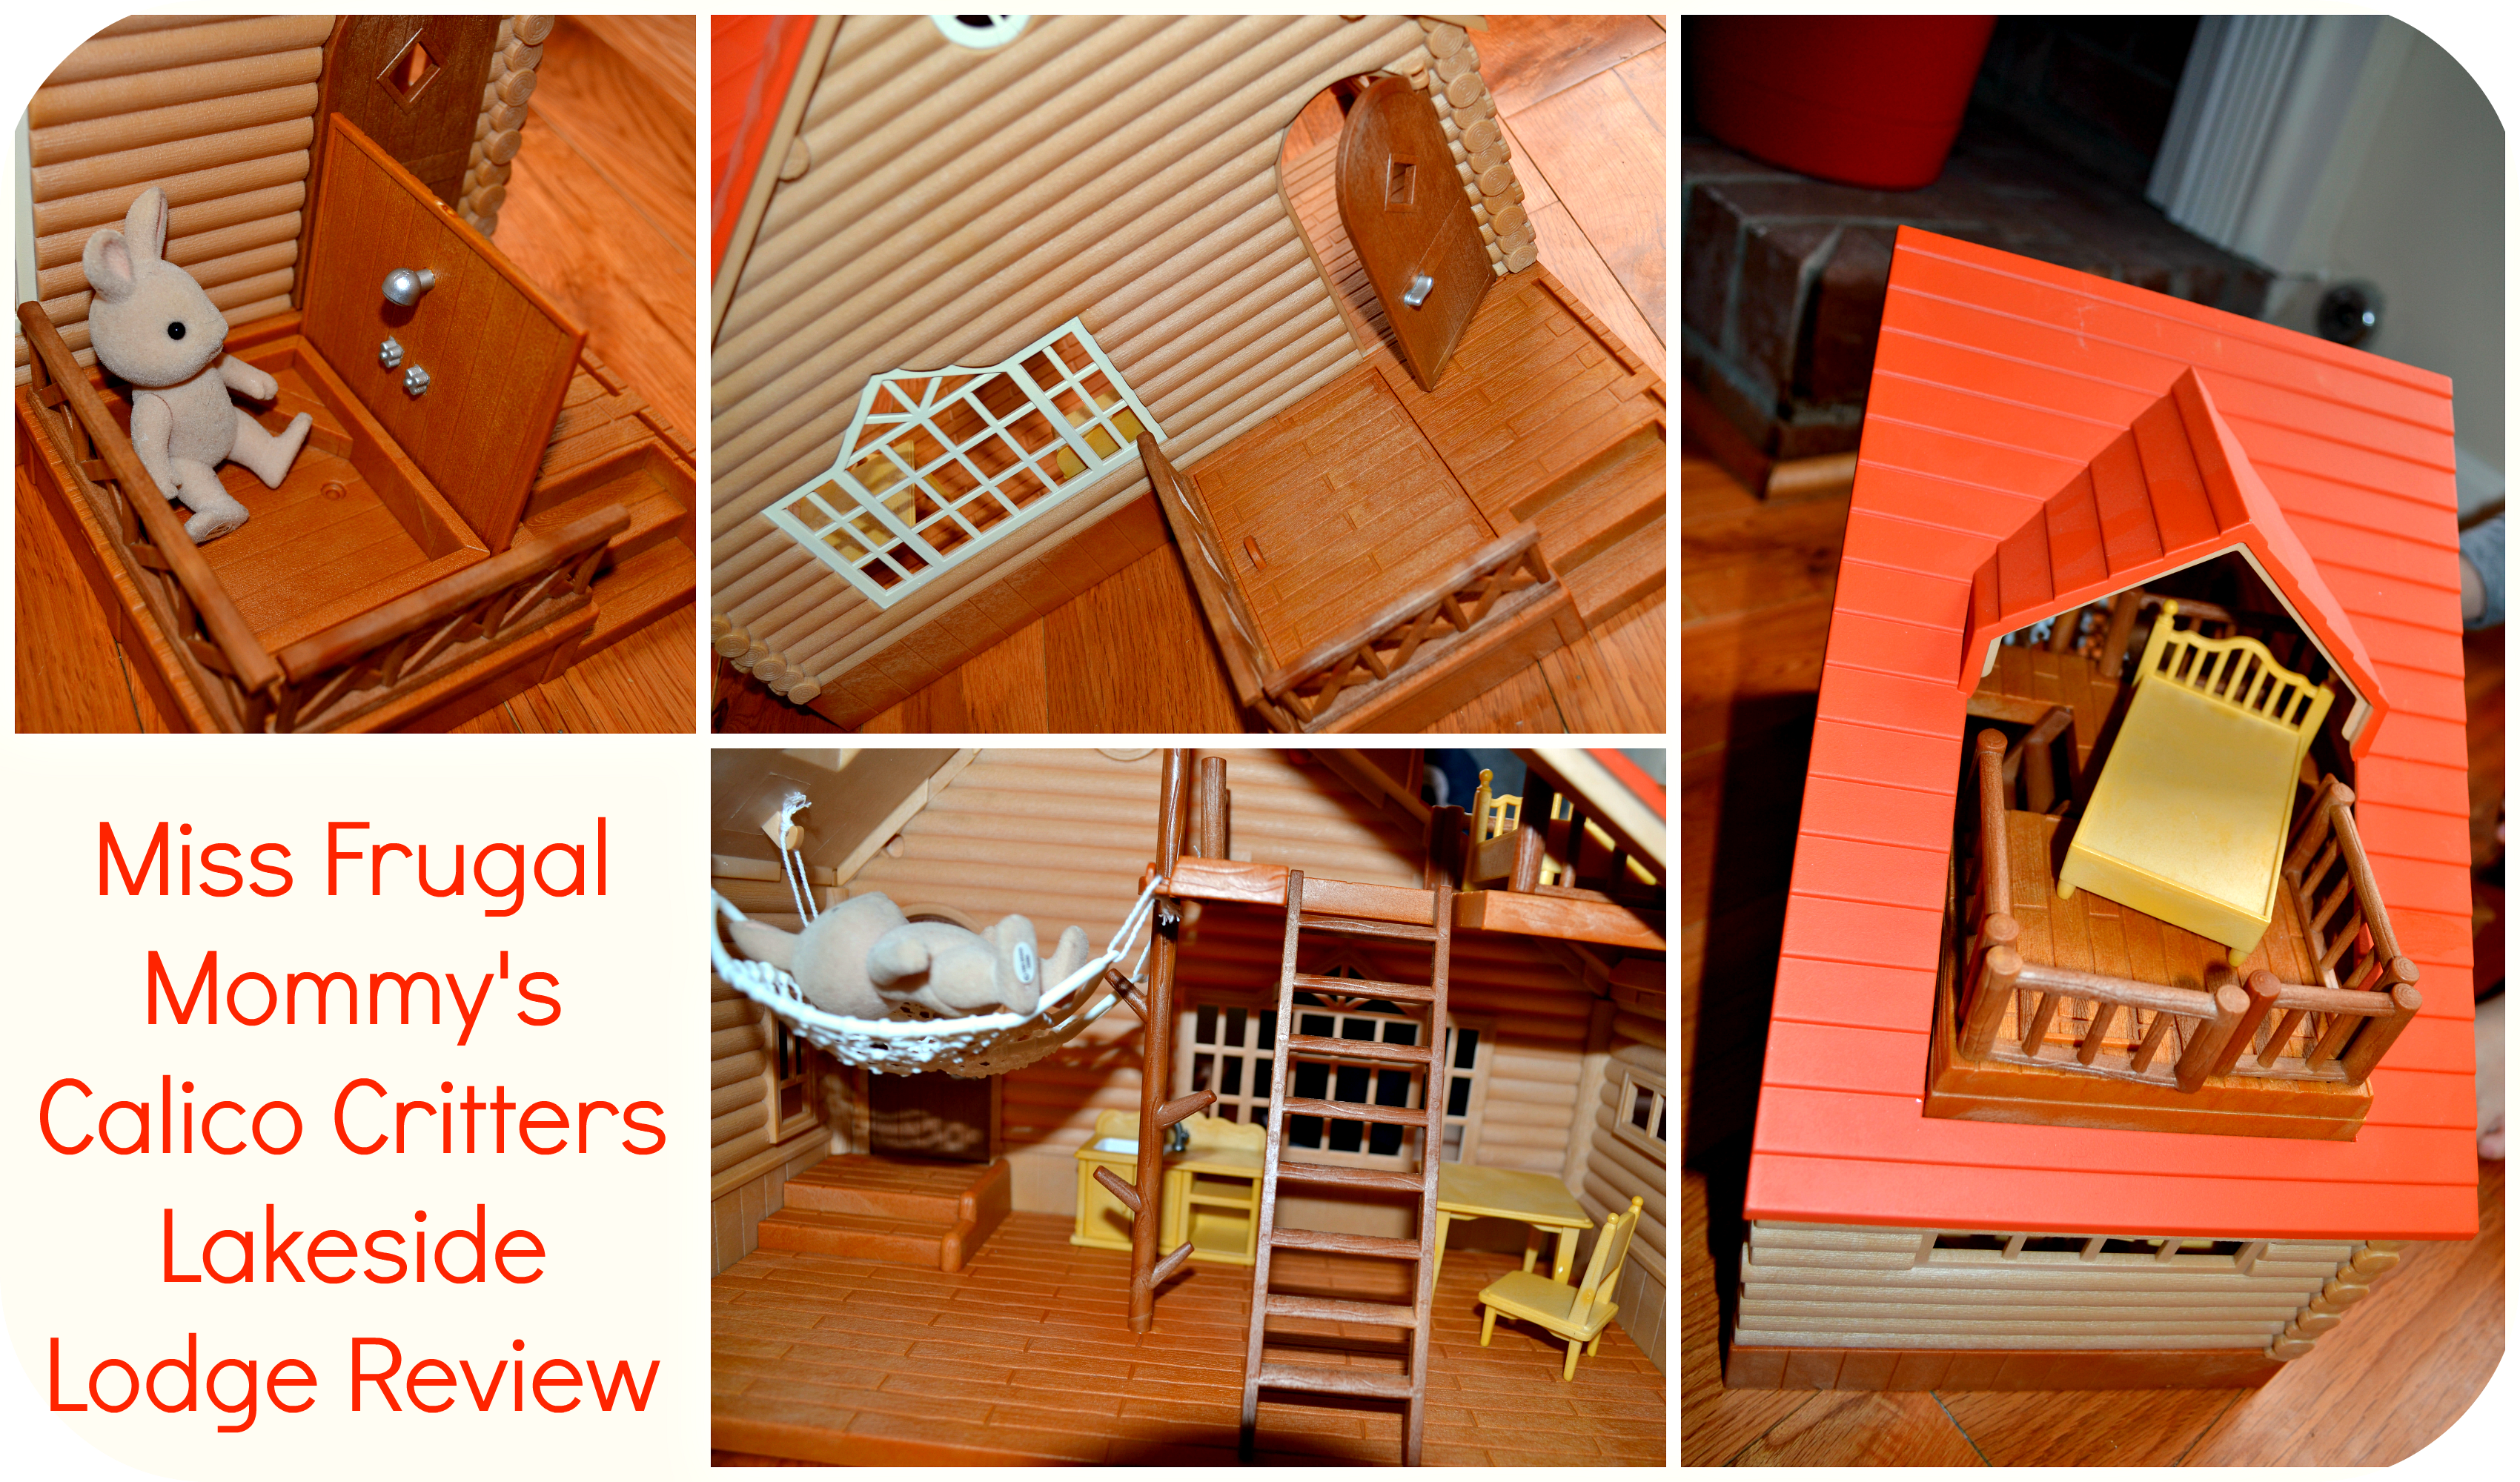 Calico Critters Lakeside Lodge Review